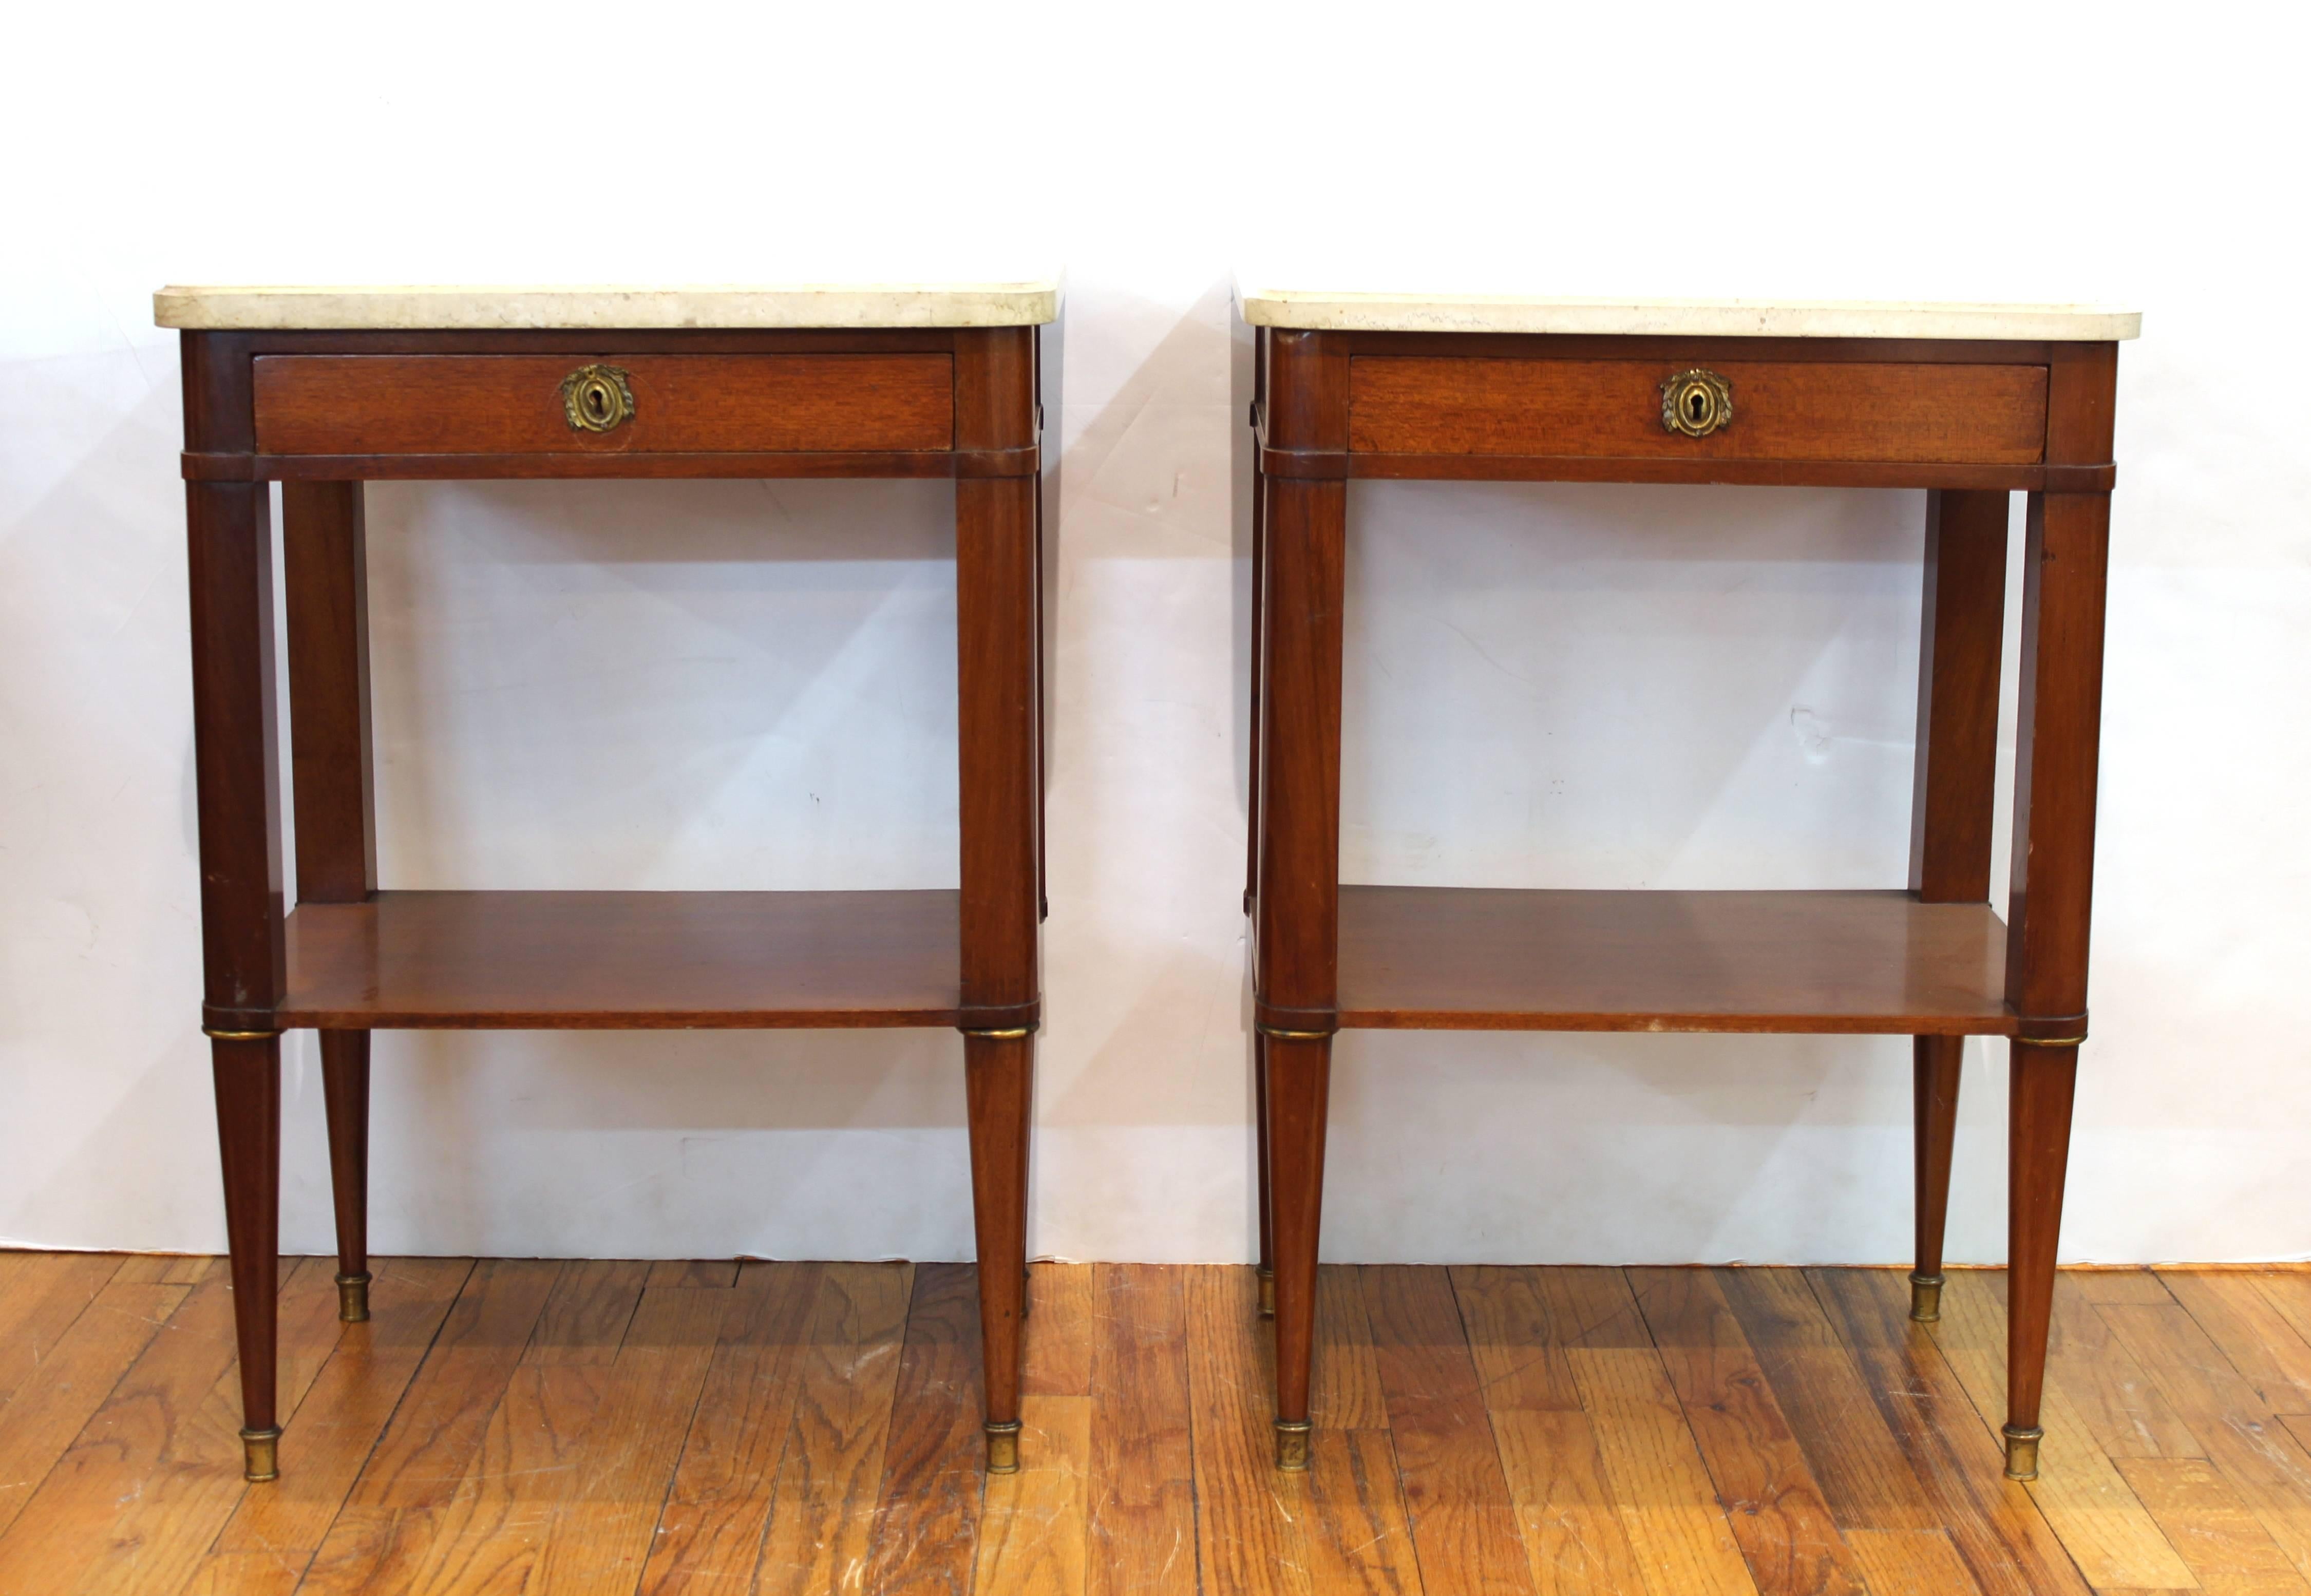 A pair of Maison Jansen style nightstands or end tables in mahogany with marble tops. The pair was made in France and is in Louis XVI style. Each one has a support shelf on the lower level and a single centre drawer underneath a marble-top. In good